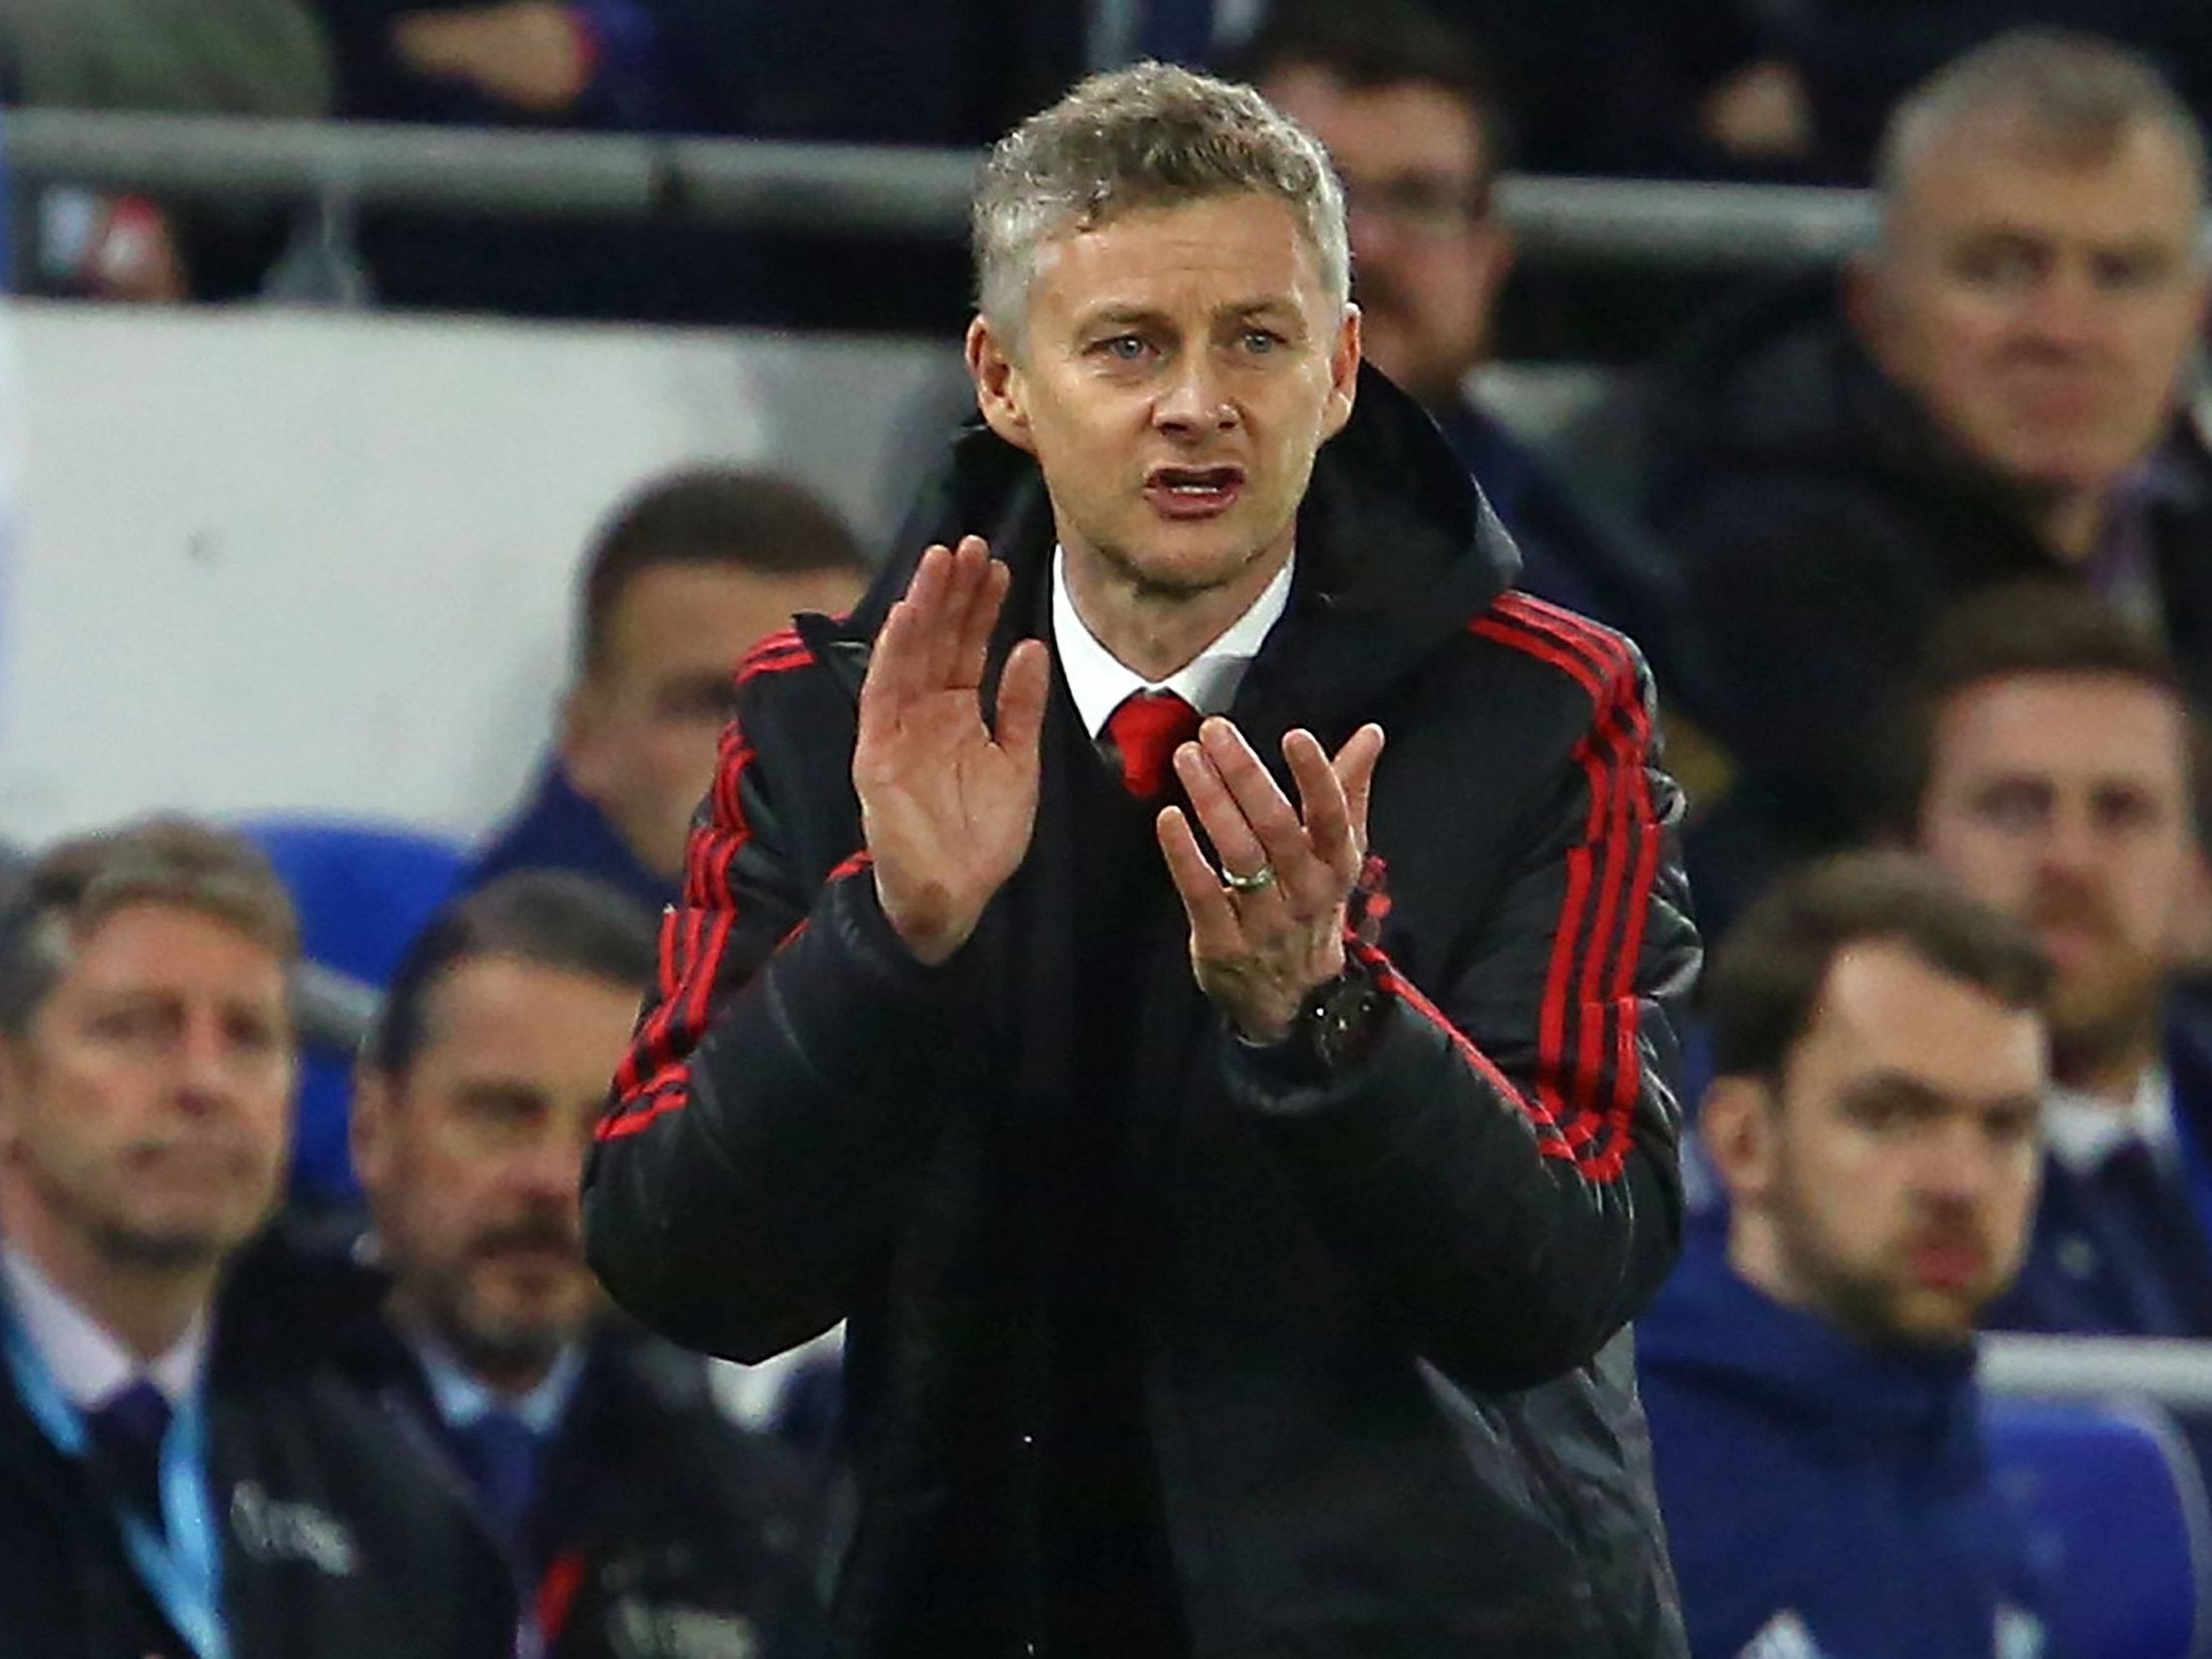 Solskjaer was able to get a good performance from every player